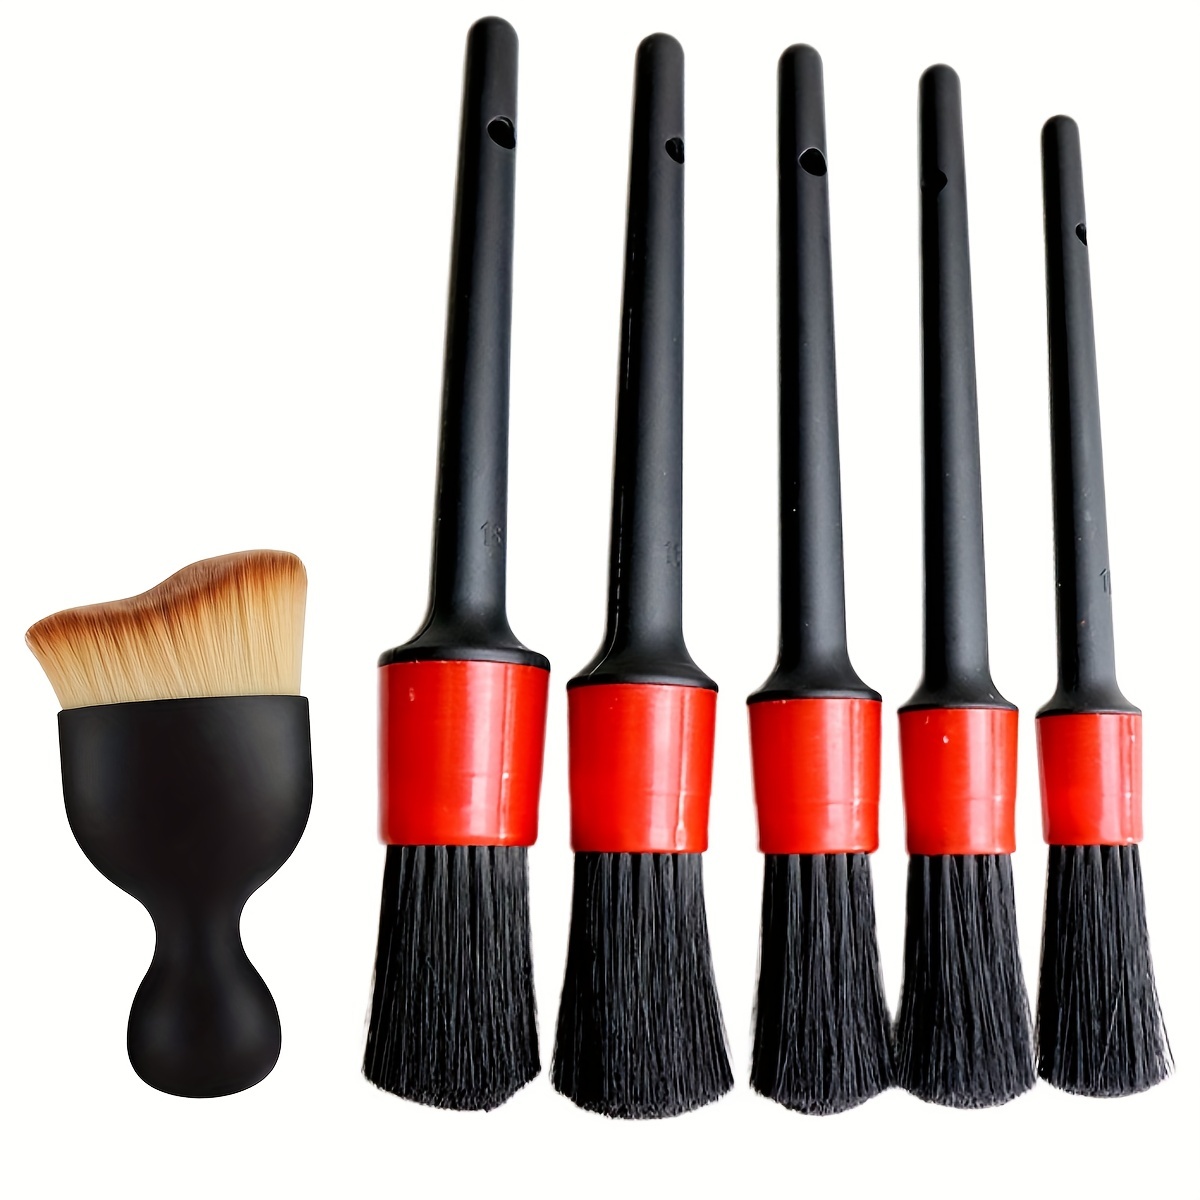 Car Interior Detailing Kit, 21Pcs Detailing Brush Set with Windshield  Cleaning Tool and Tire Brush, Leather & Textile Car Interior Brush, Car  Detail